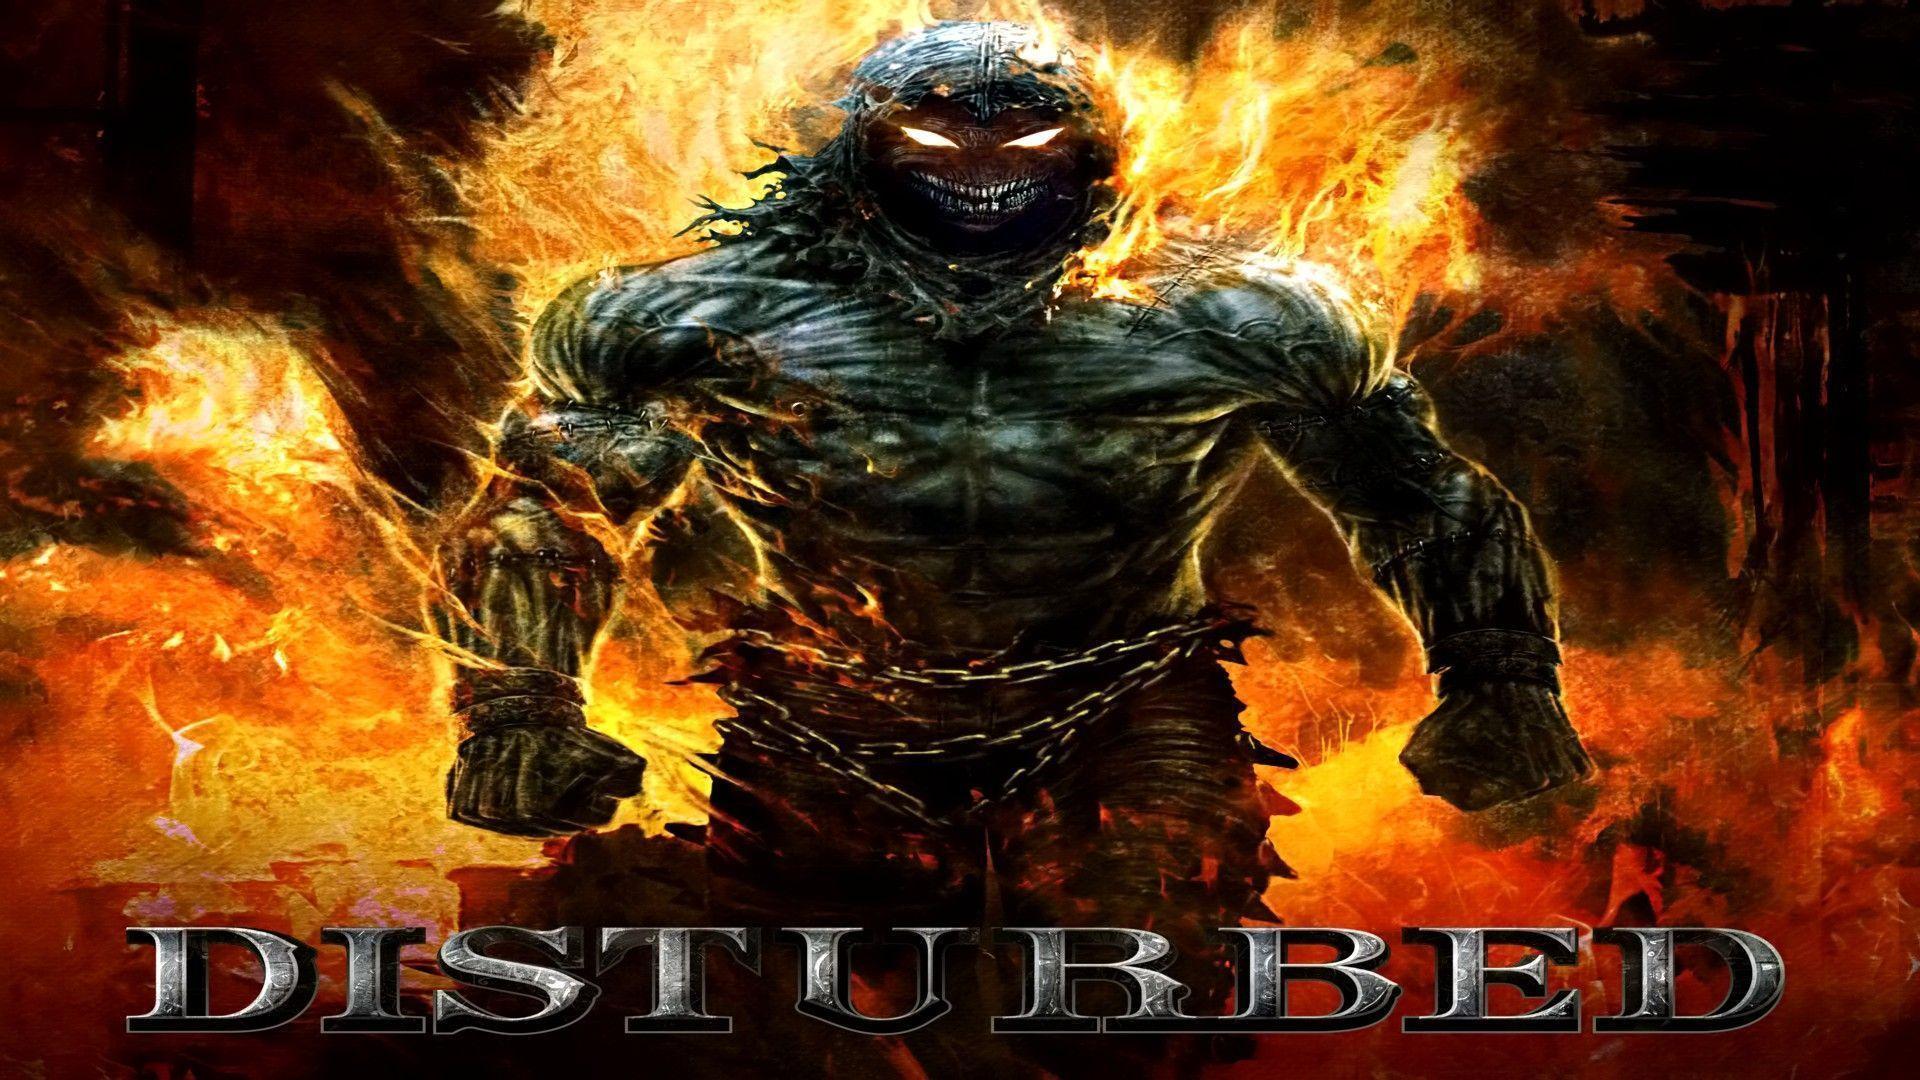 image For > Disturbed The Guy Wallpaper Indestructible